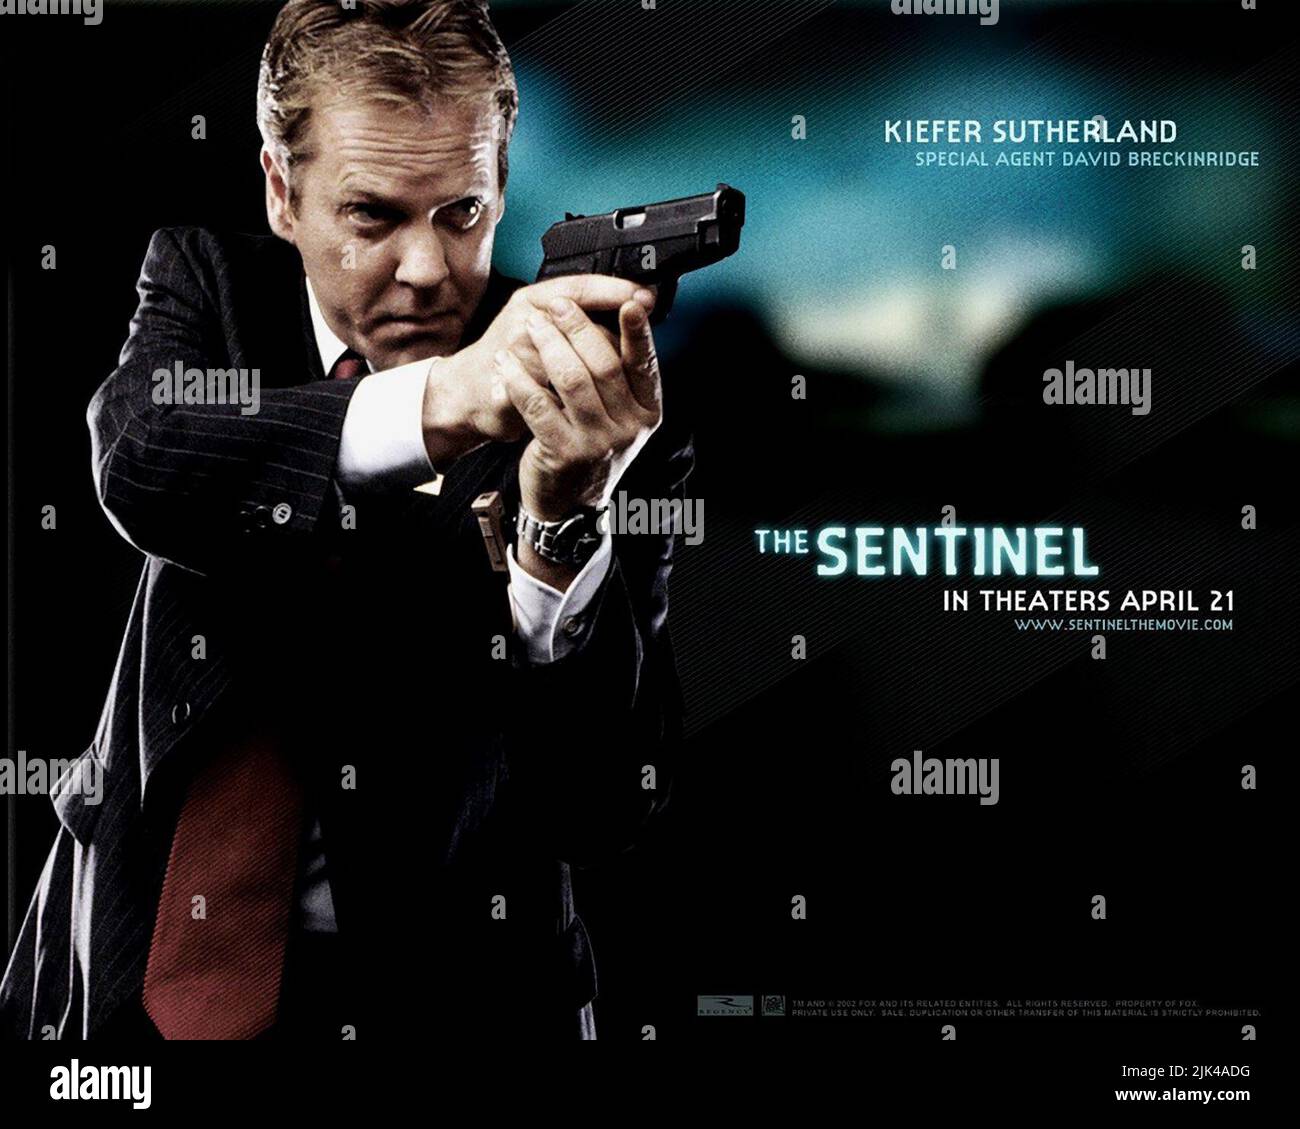 KIEFER SUTHERLAND POSTER, THE SENTINEL, 2006 Stock Photo